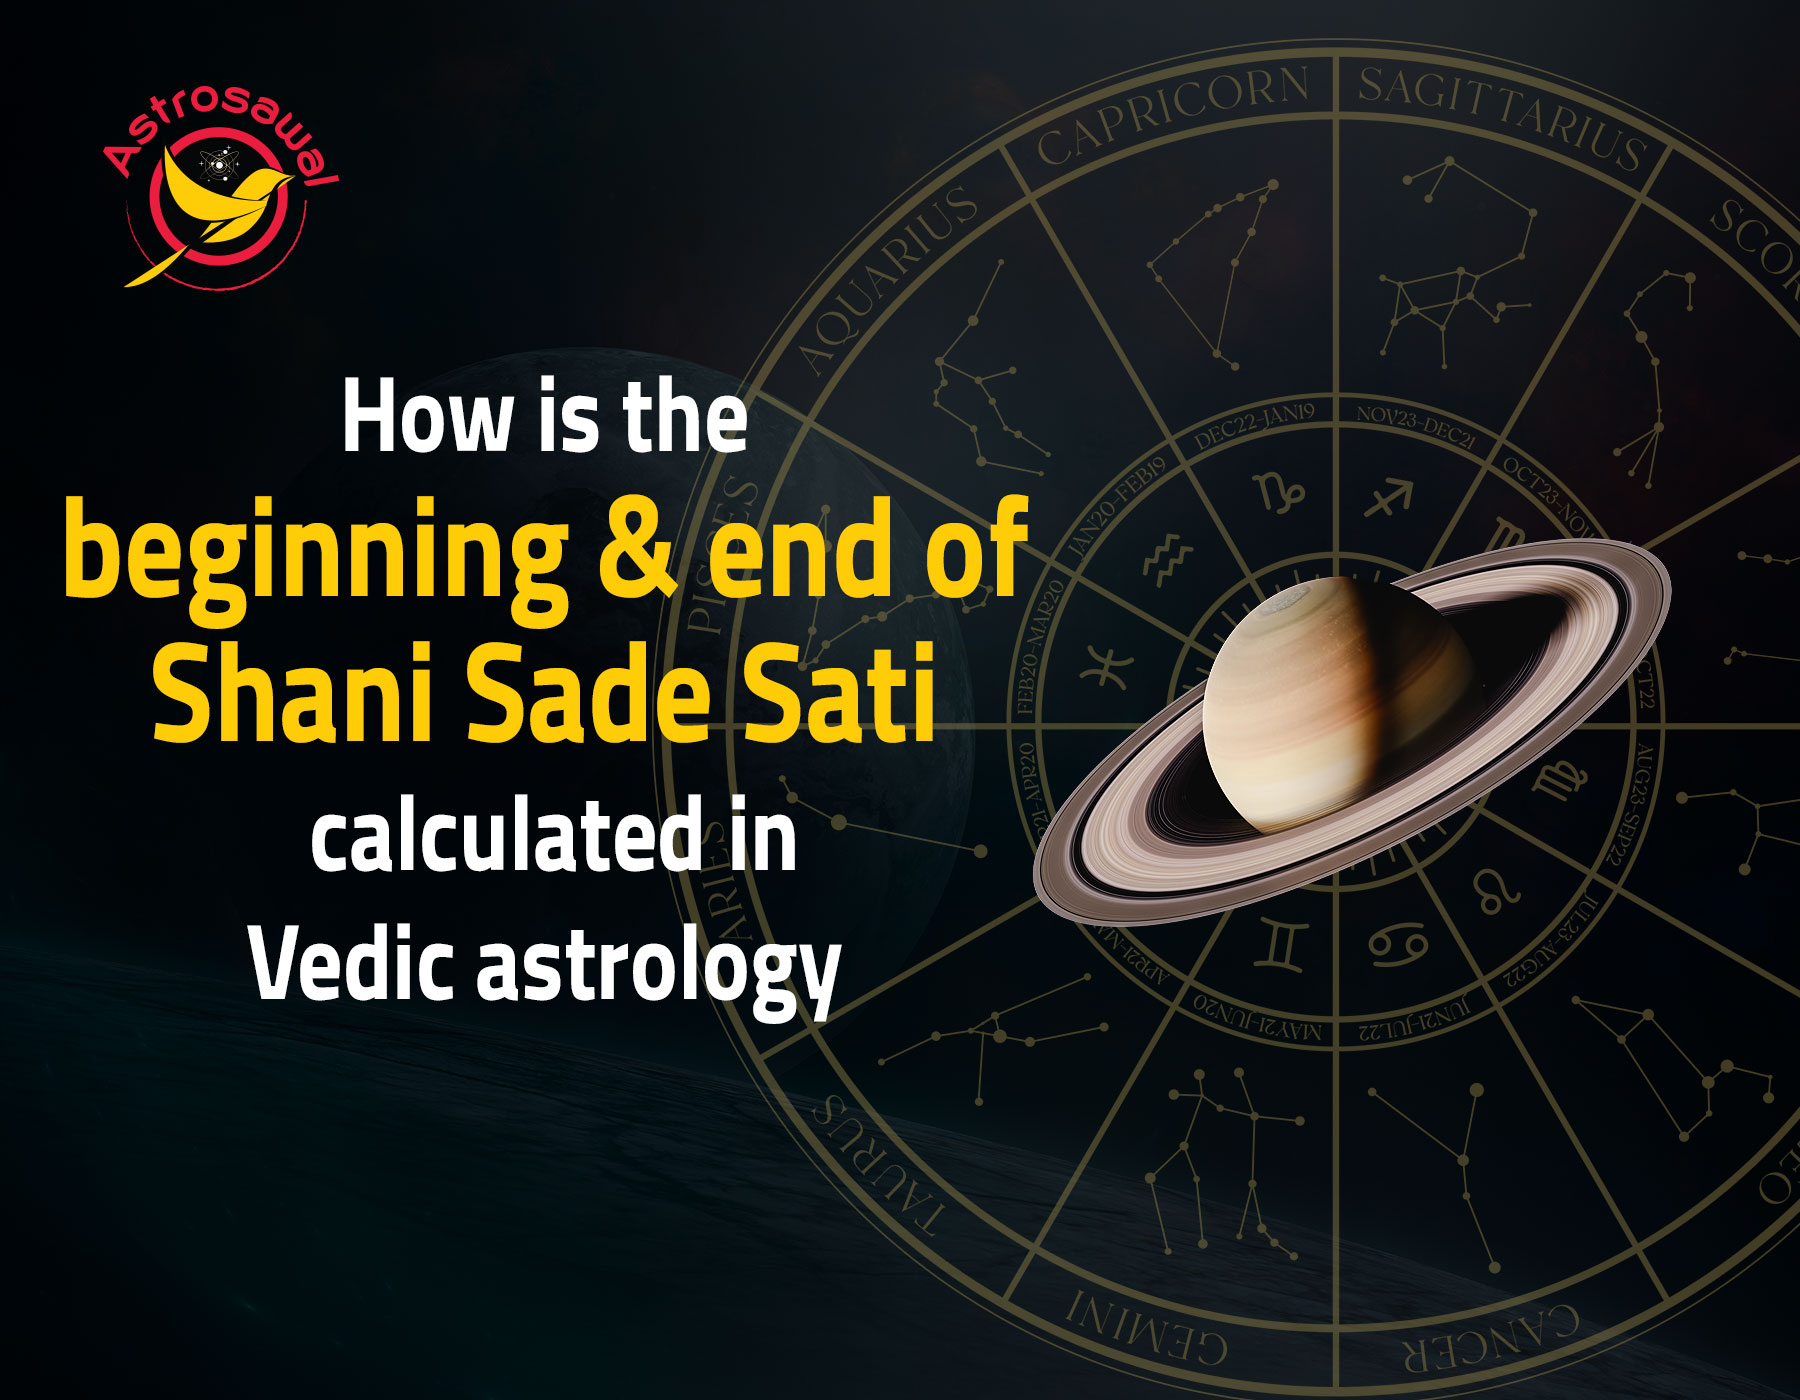 How is the Beginning and End of Shani Sade Sati Calculated in Vedic Astrology